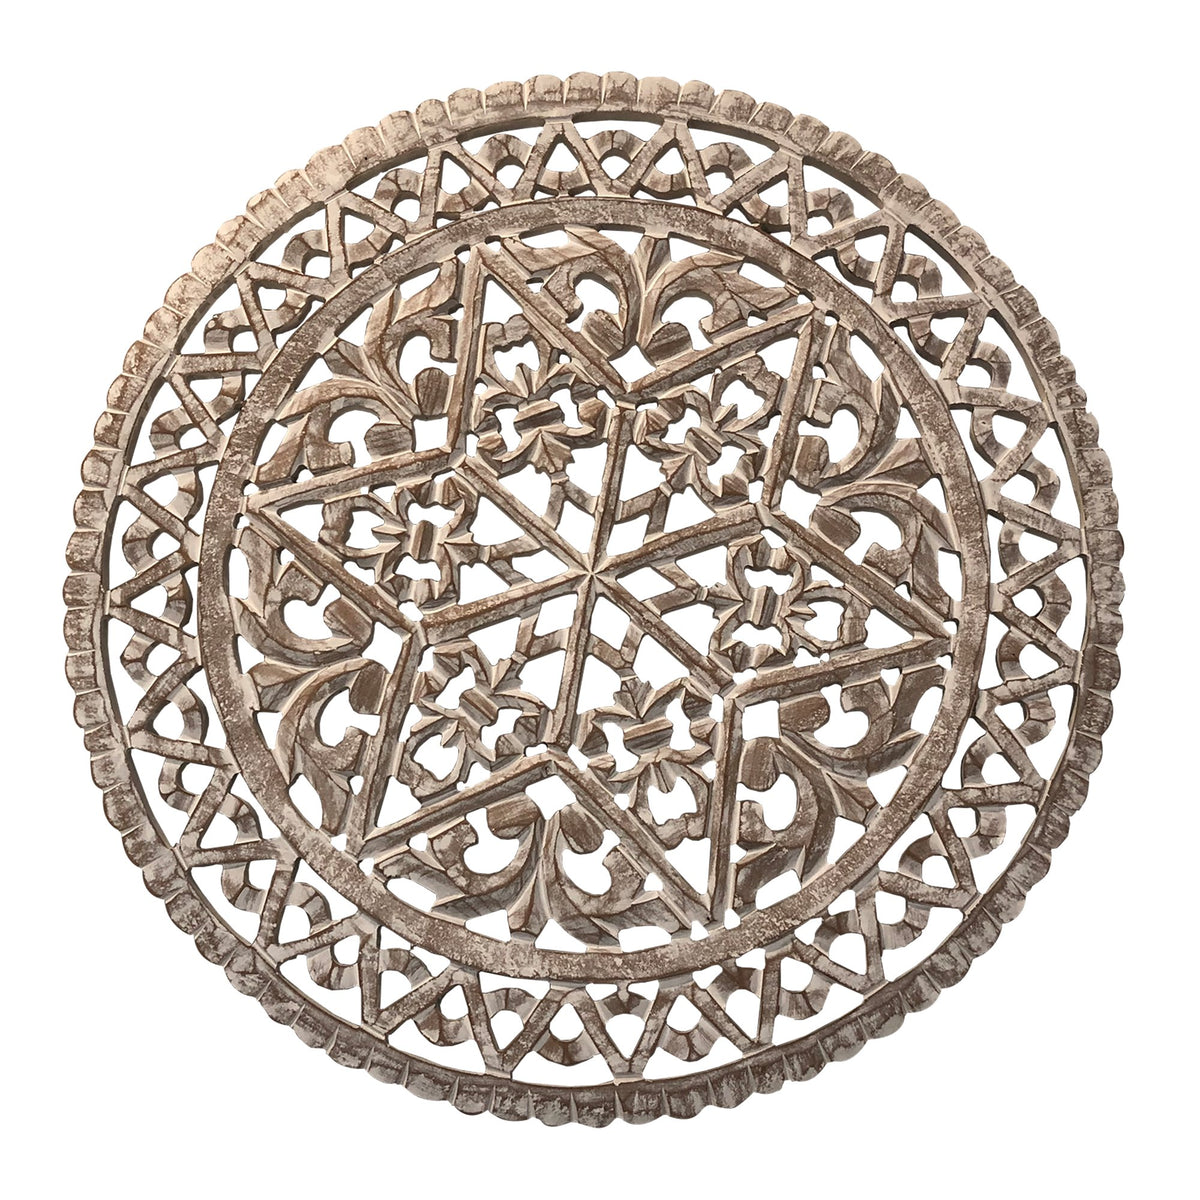 30 Inch Round Wooden Carved Wall Art with Intricate Cutouts, Distressed White - UPT-225286